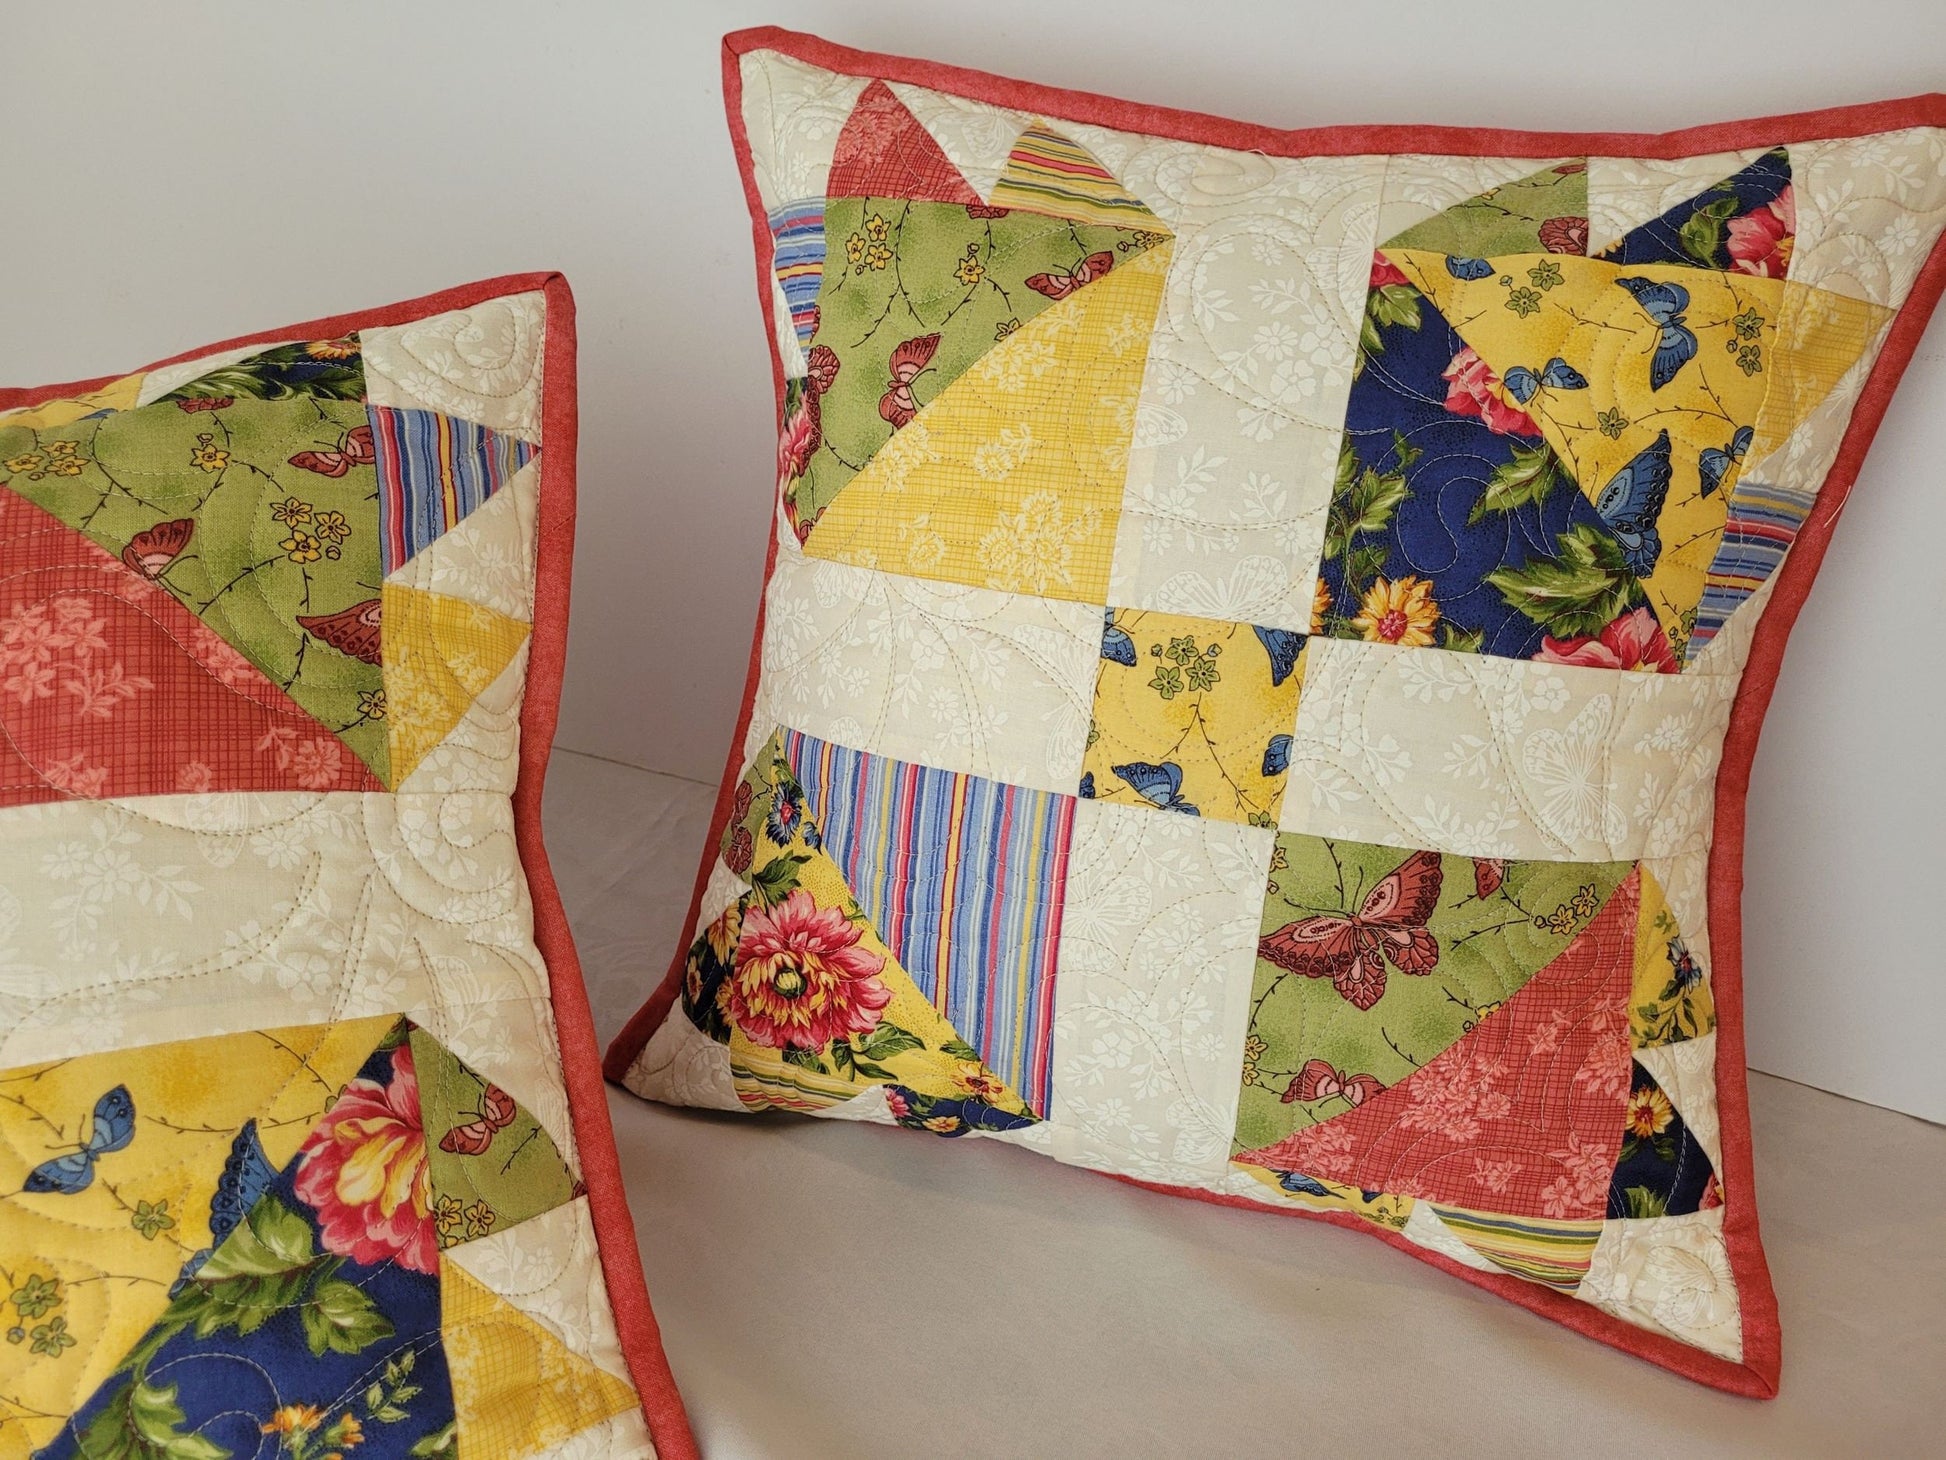 quilted pillow in scrappy bear paw pattern with summer floral prints